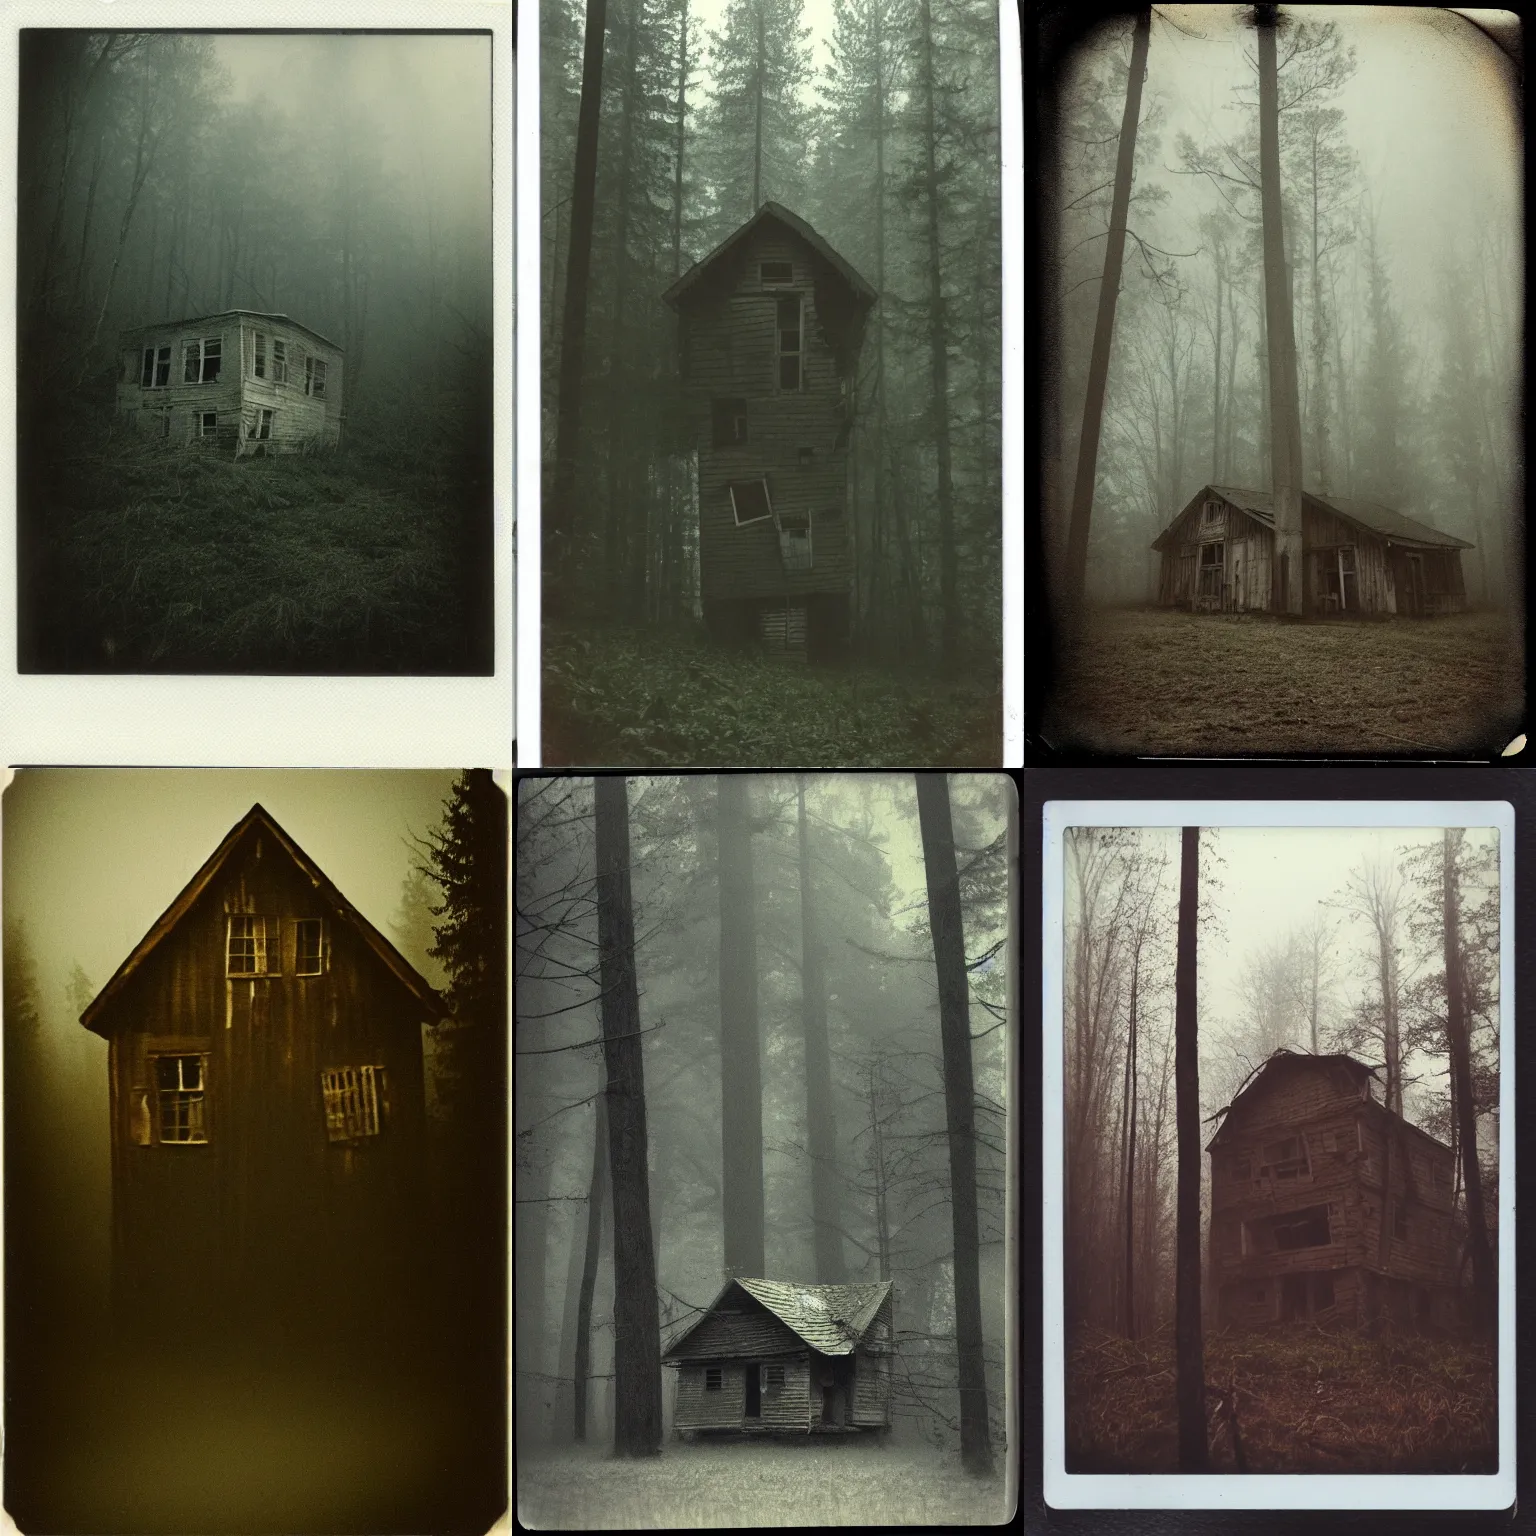 Prompt: Polaroid of an old ramshackle wooden house on the edge of a forest, foggy, creepy, scary, ominous, oppressive